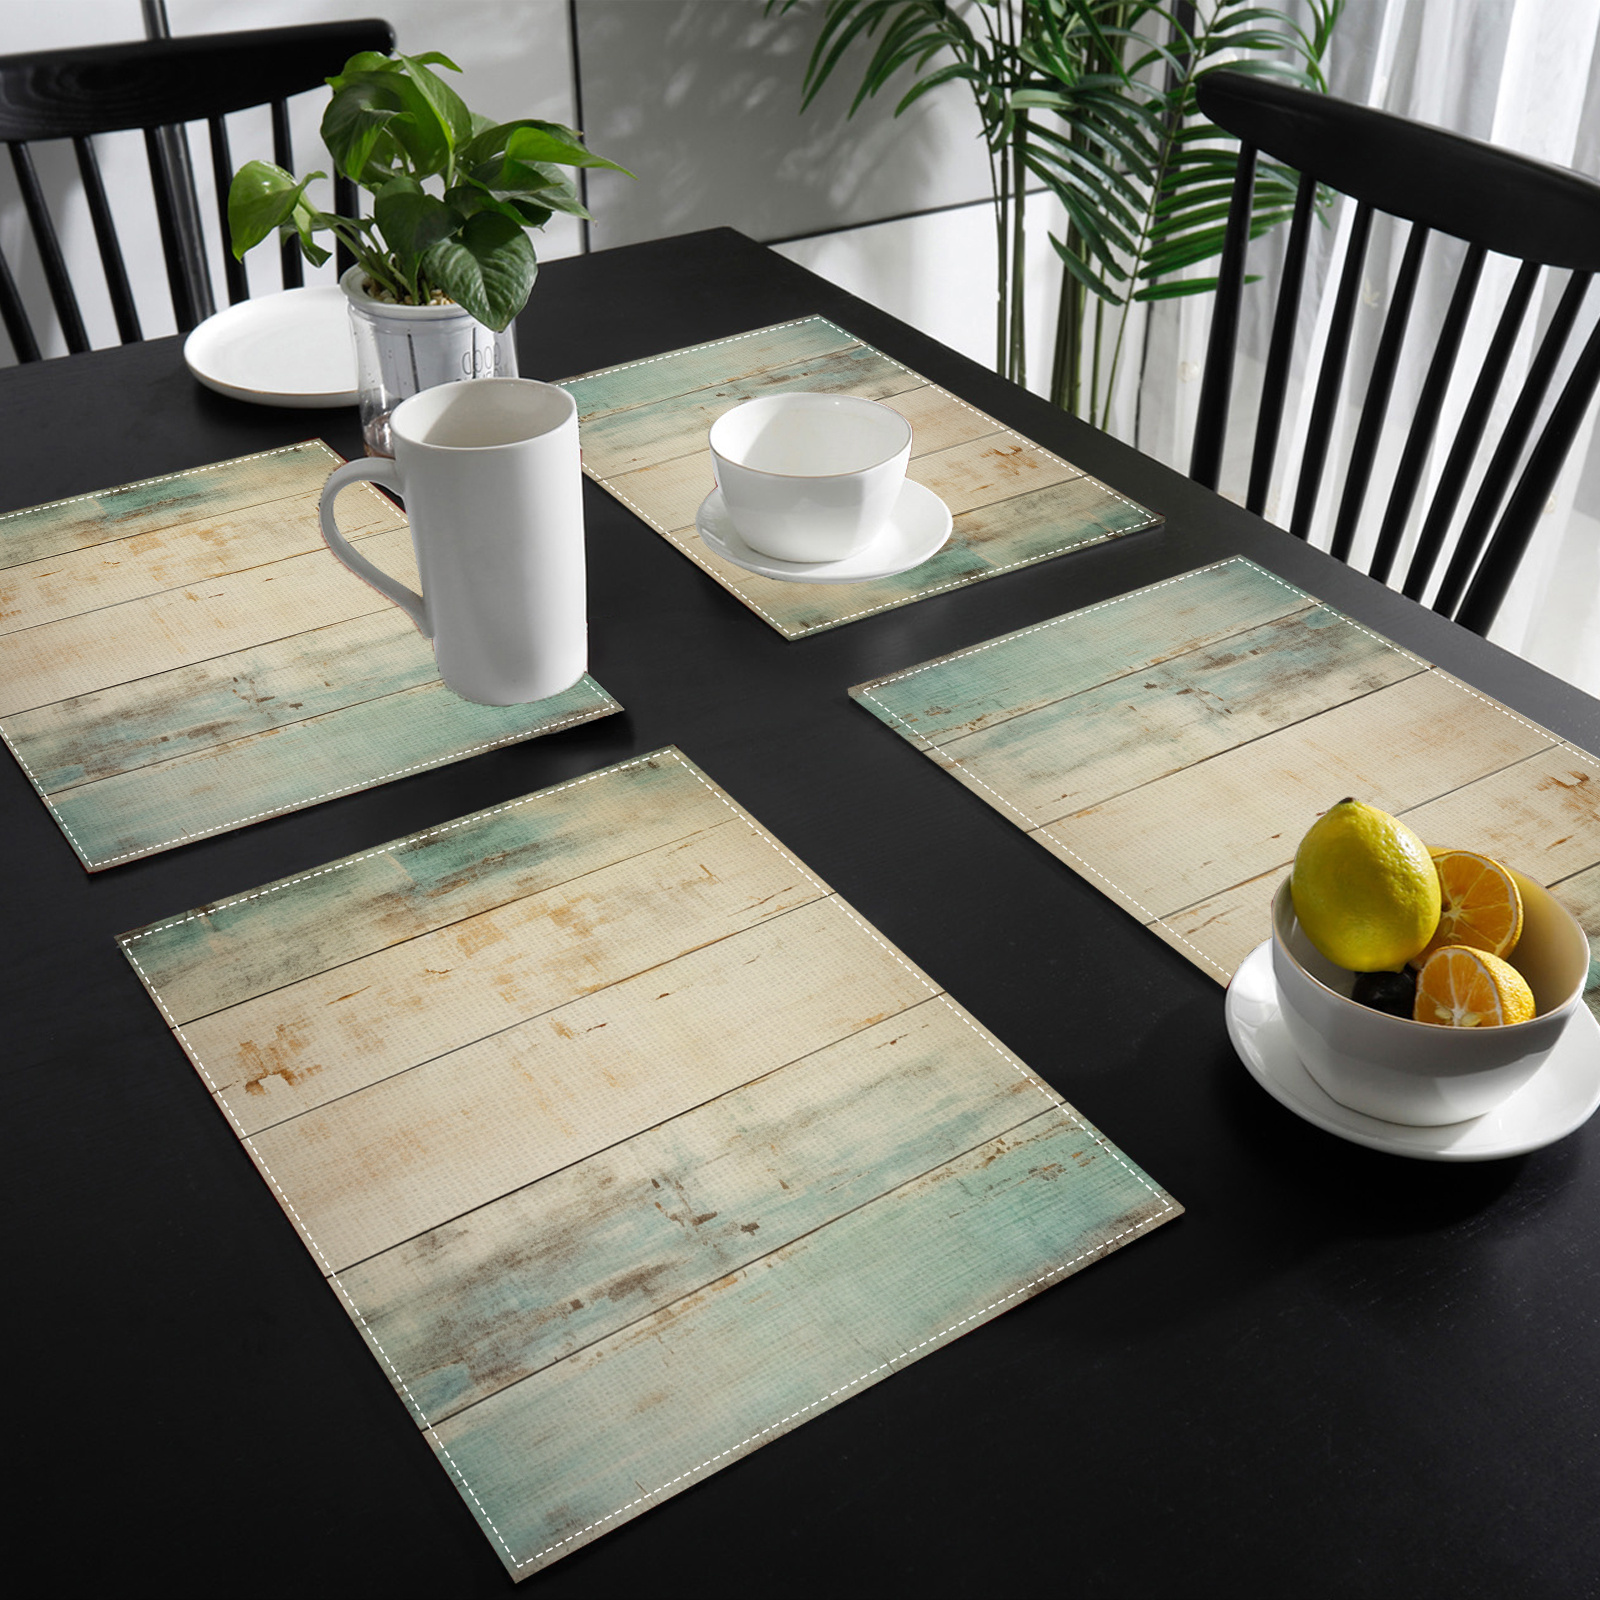 

1/2/4pcs, Linen Placemats, Wooden Boards Printed Table Pads, Heat-resistant, Anti-slip, Luxurious Decorative Dining Table Mats For Festive Dinners